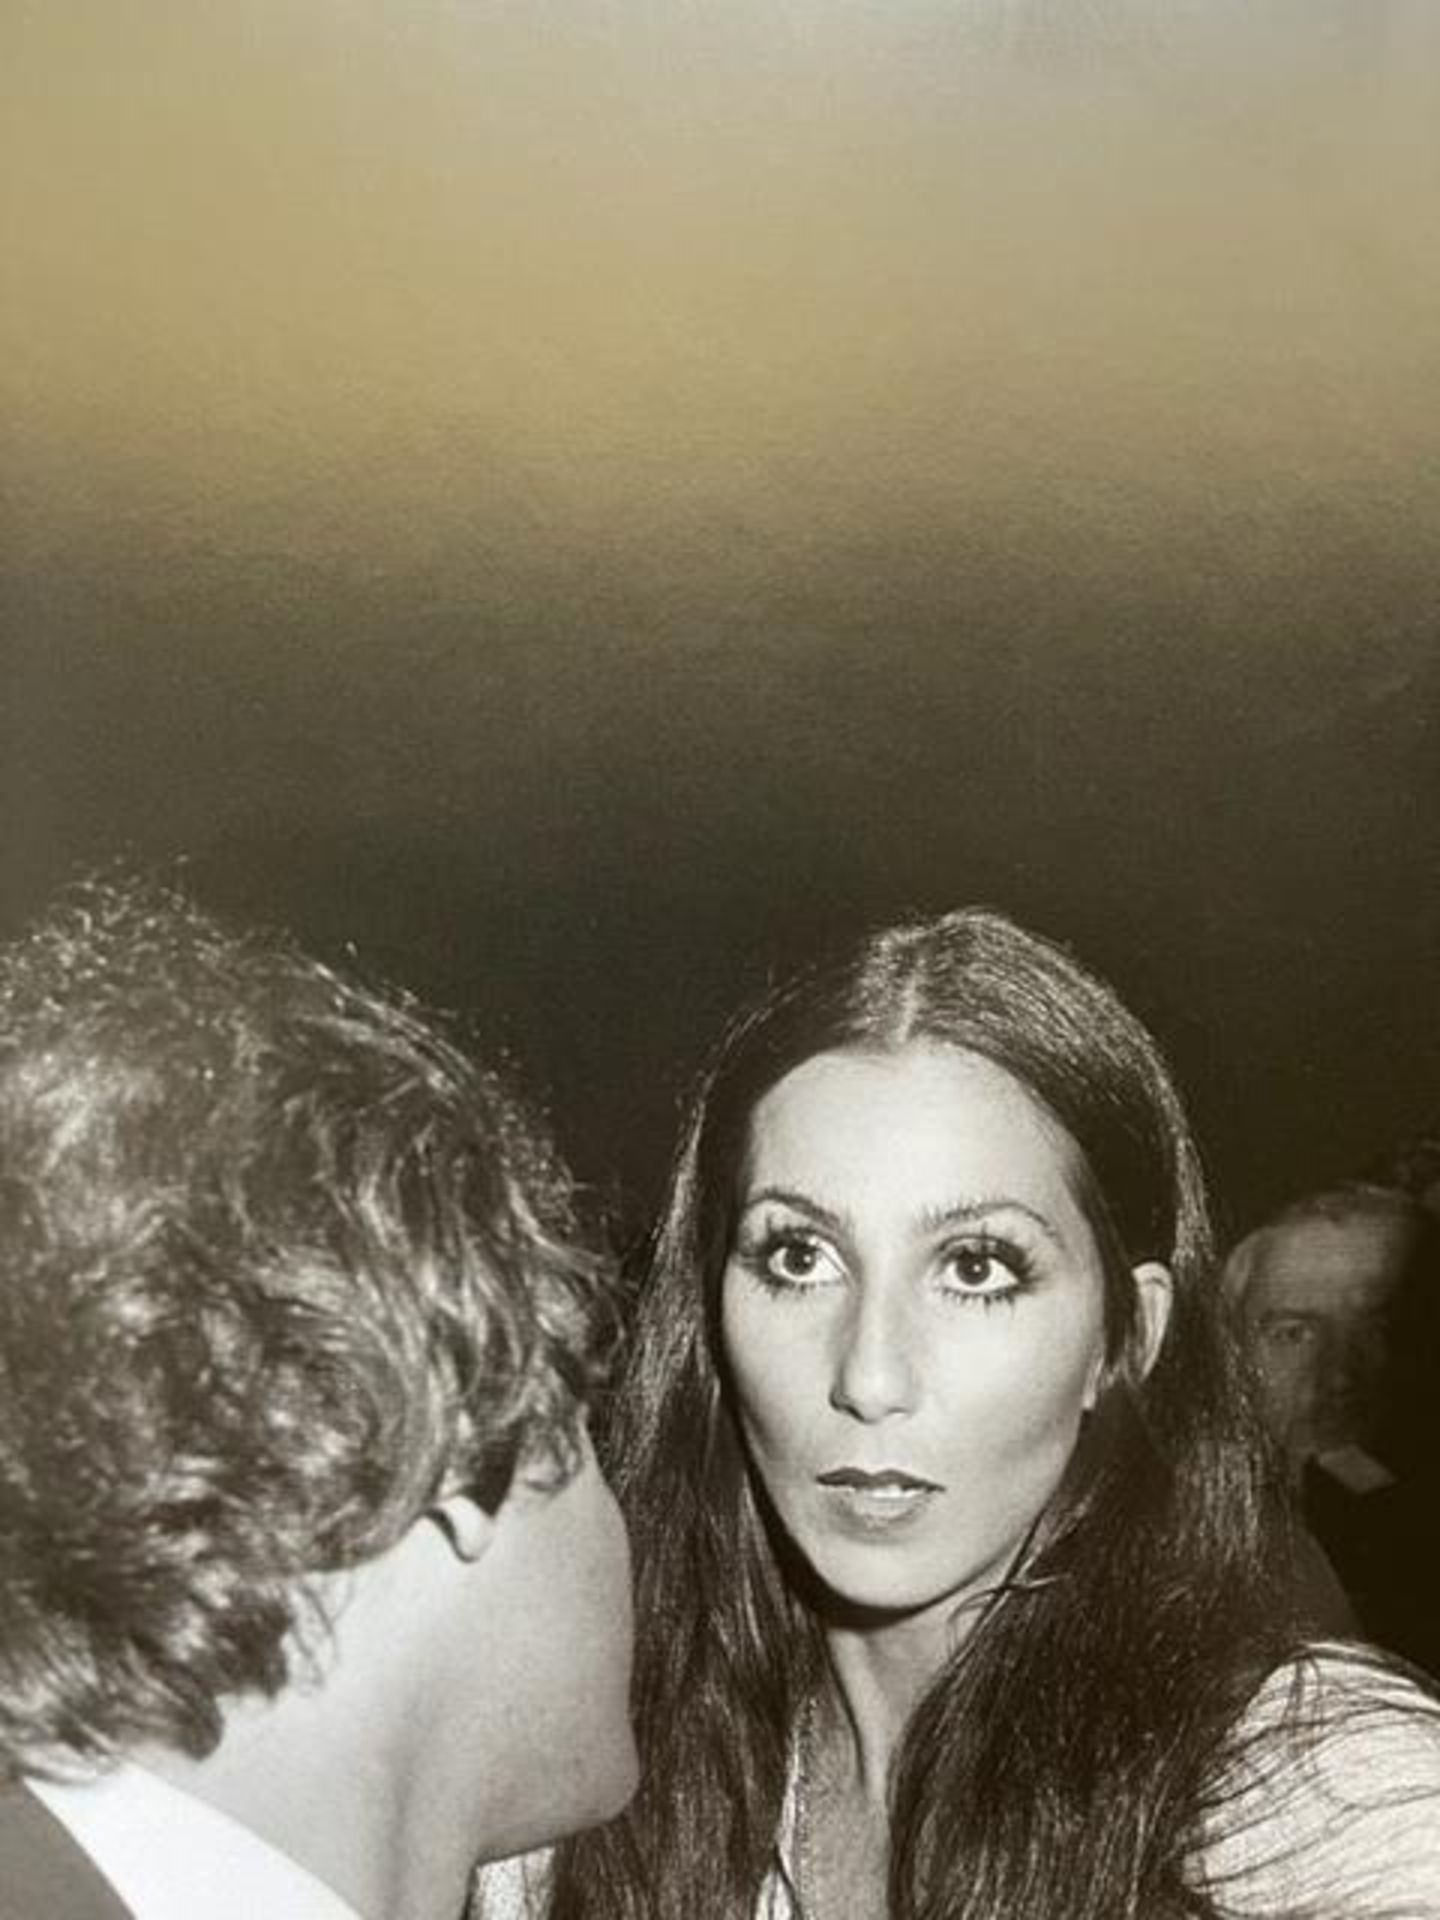 Ian Schrager "Cher with Steve" Print. - Image 5 of 6